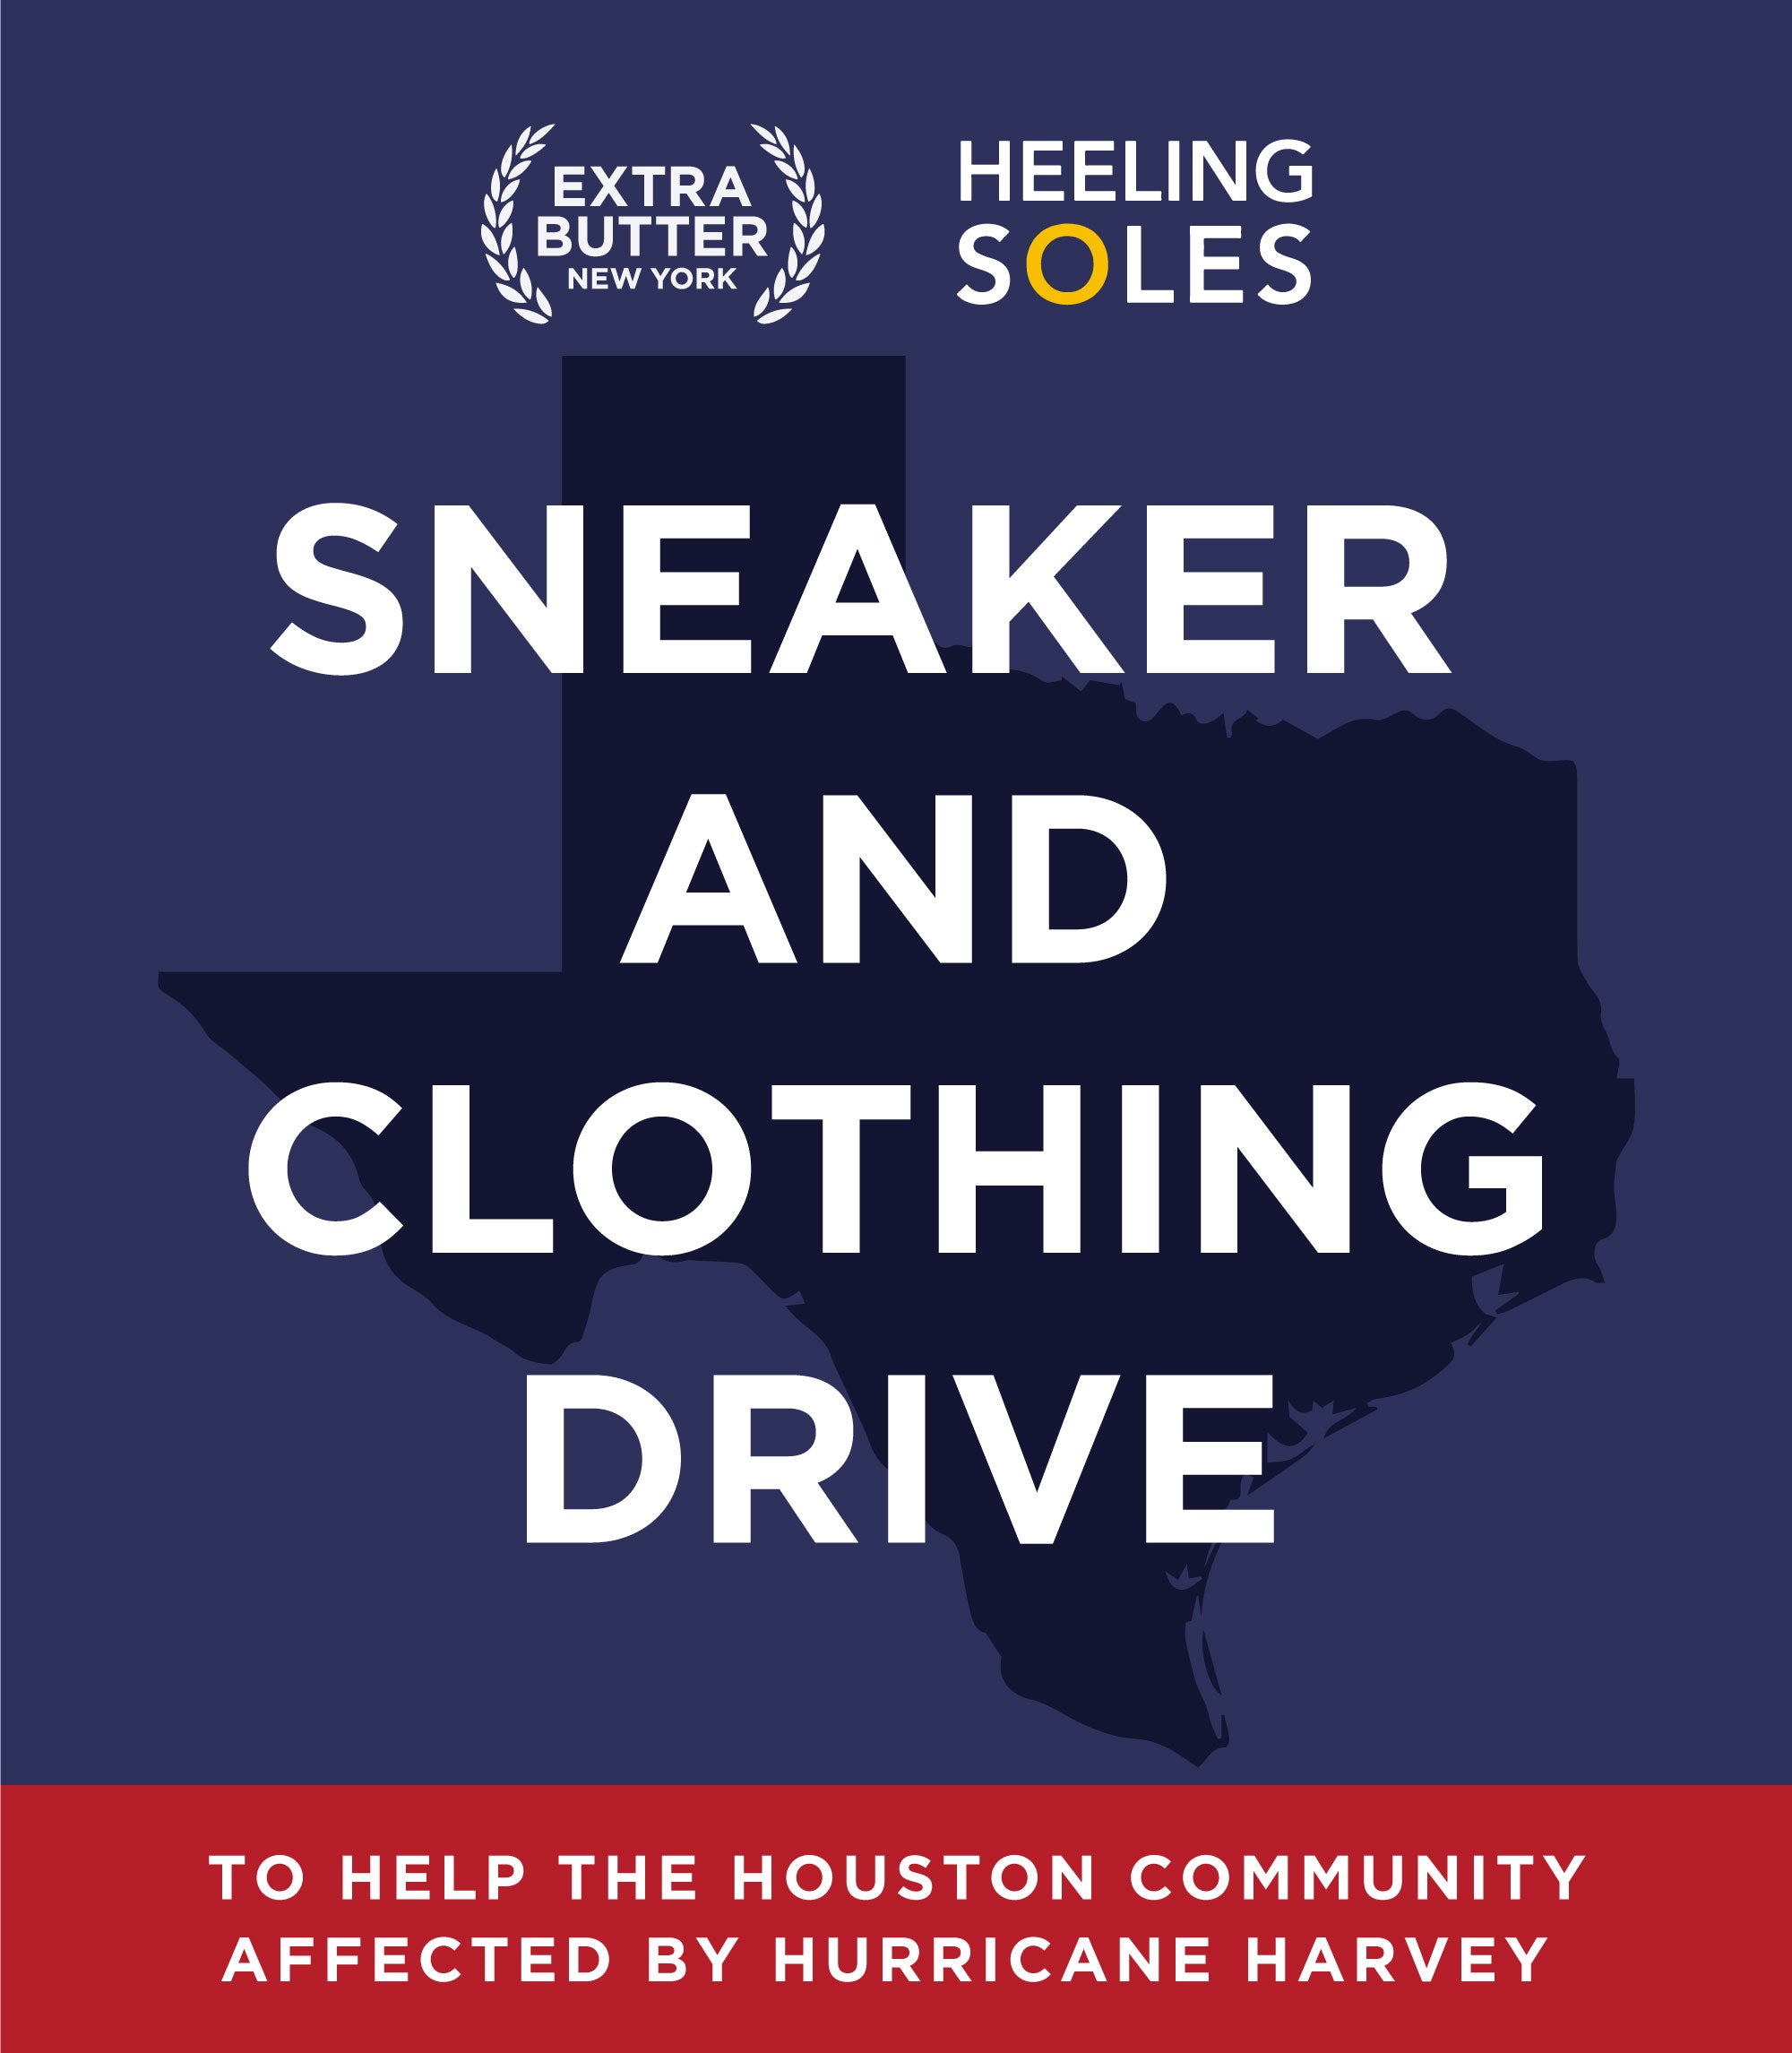 Extra Butter x Heeling Soles - Footwear and Clothing Donation to Hurricane Harvey Victims card image